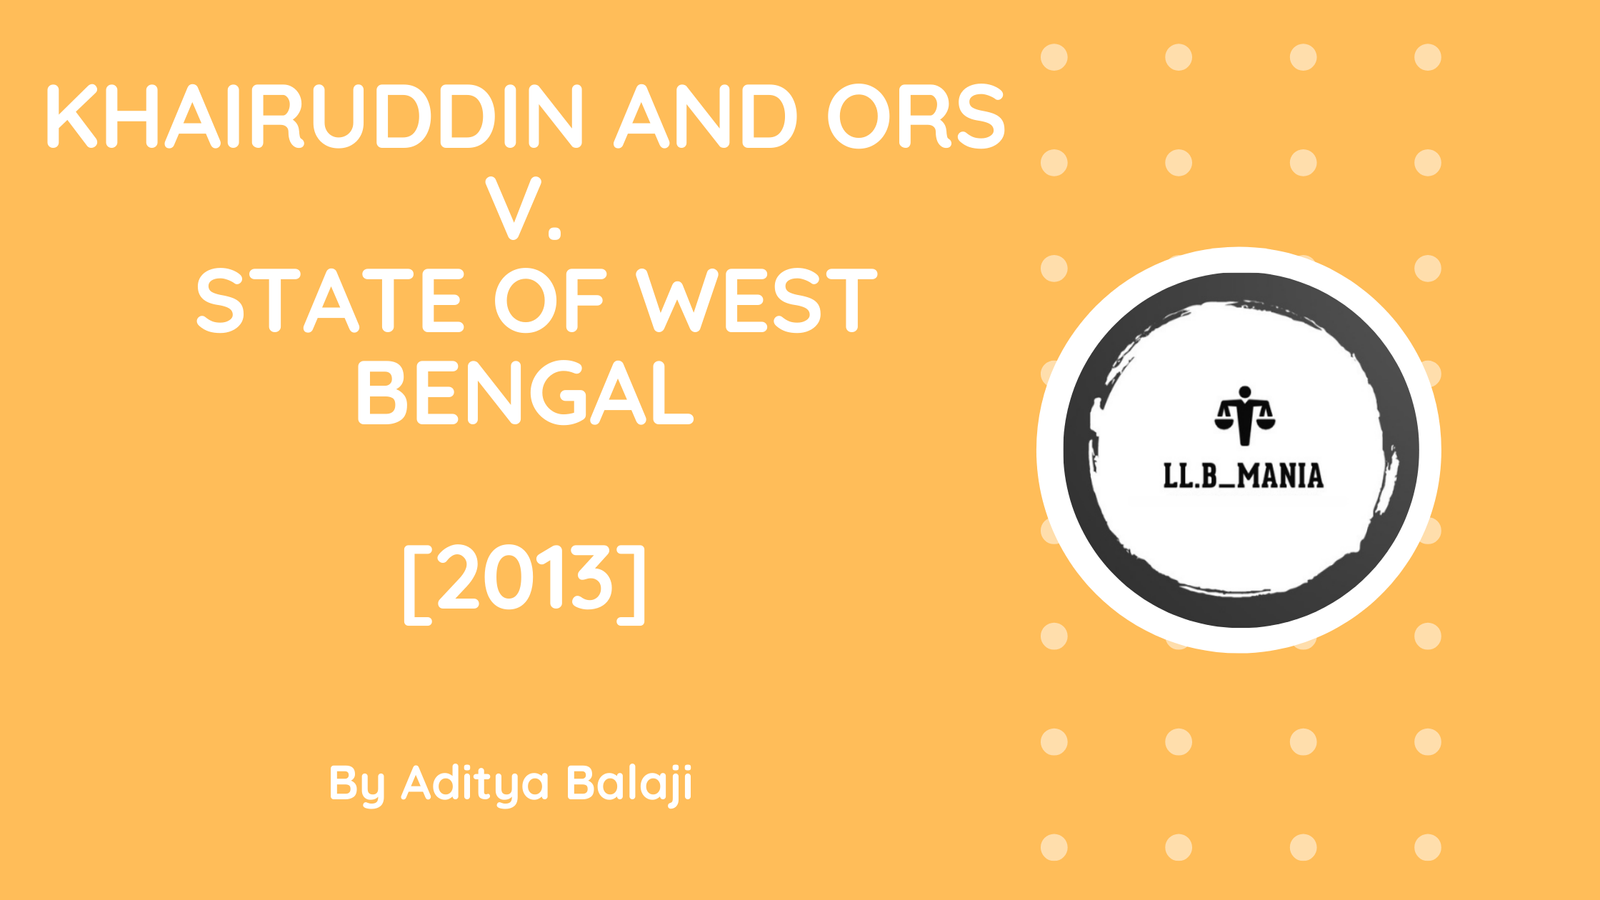 Khairuddin and Ors v. State of West Bengal [2013]